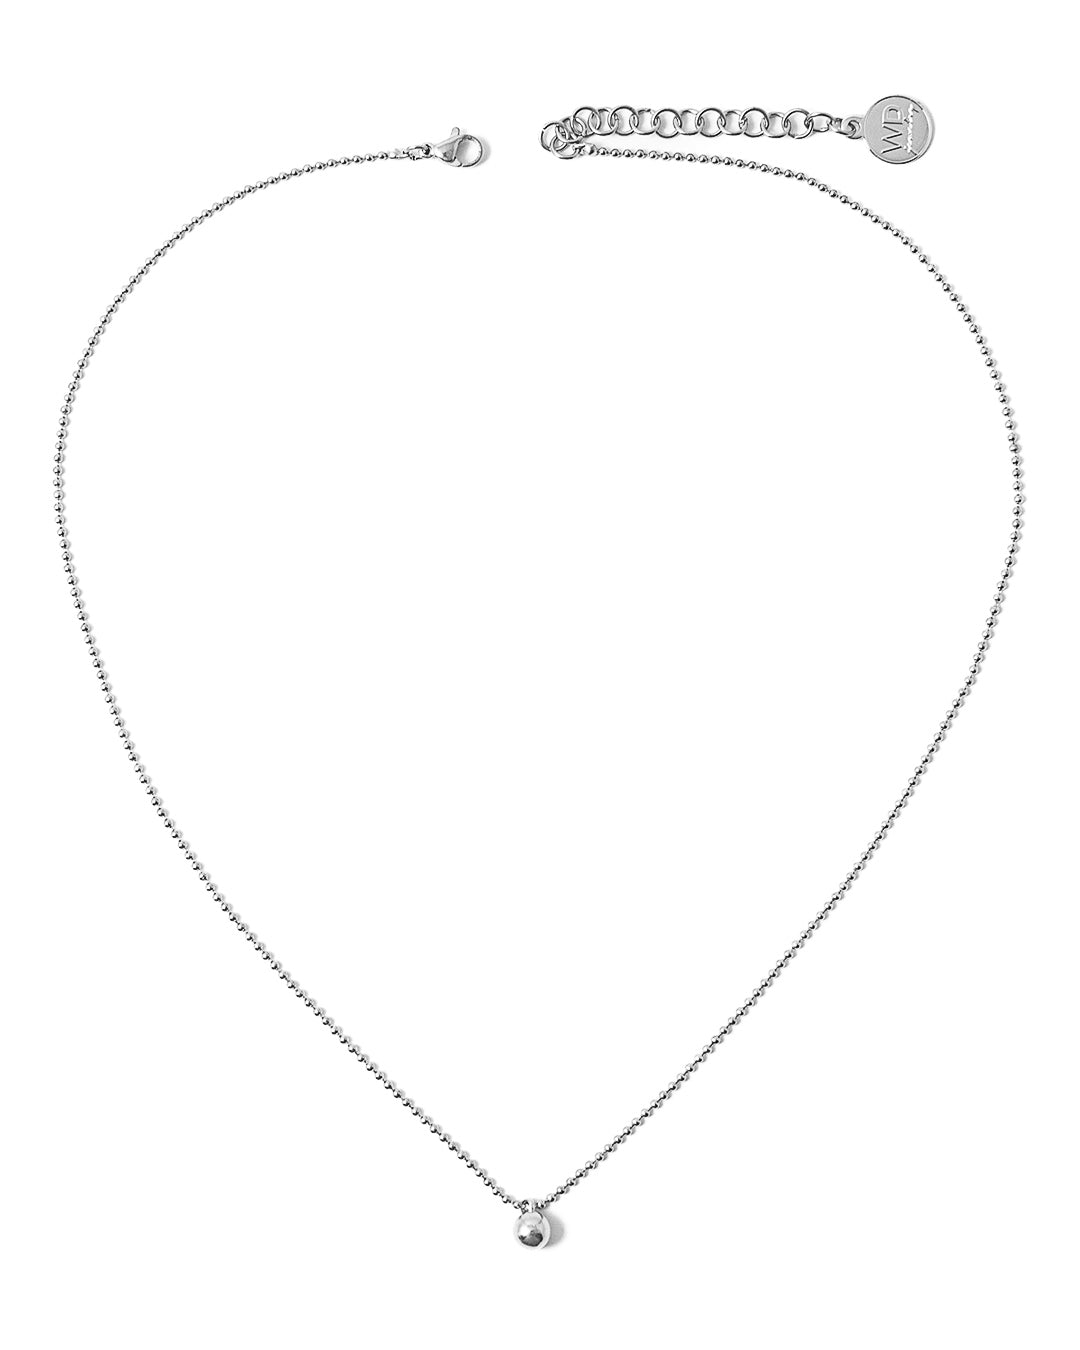 Bola collier argent